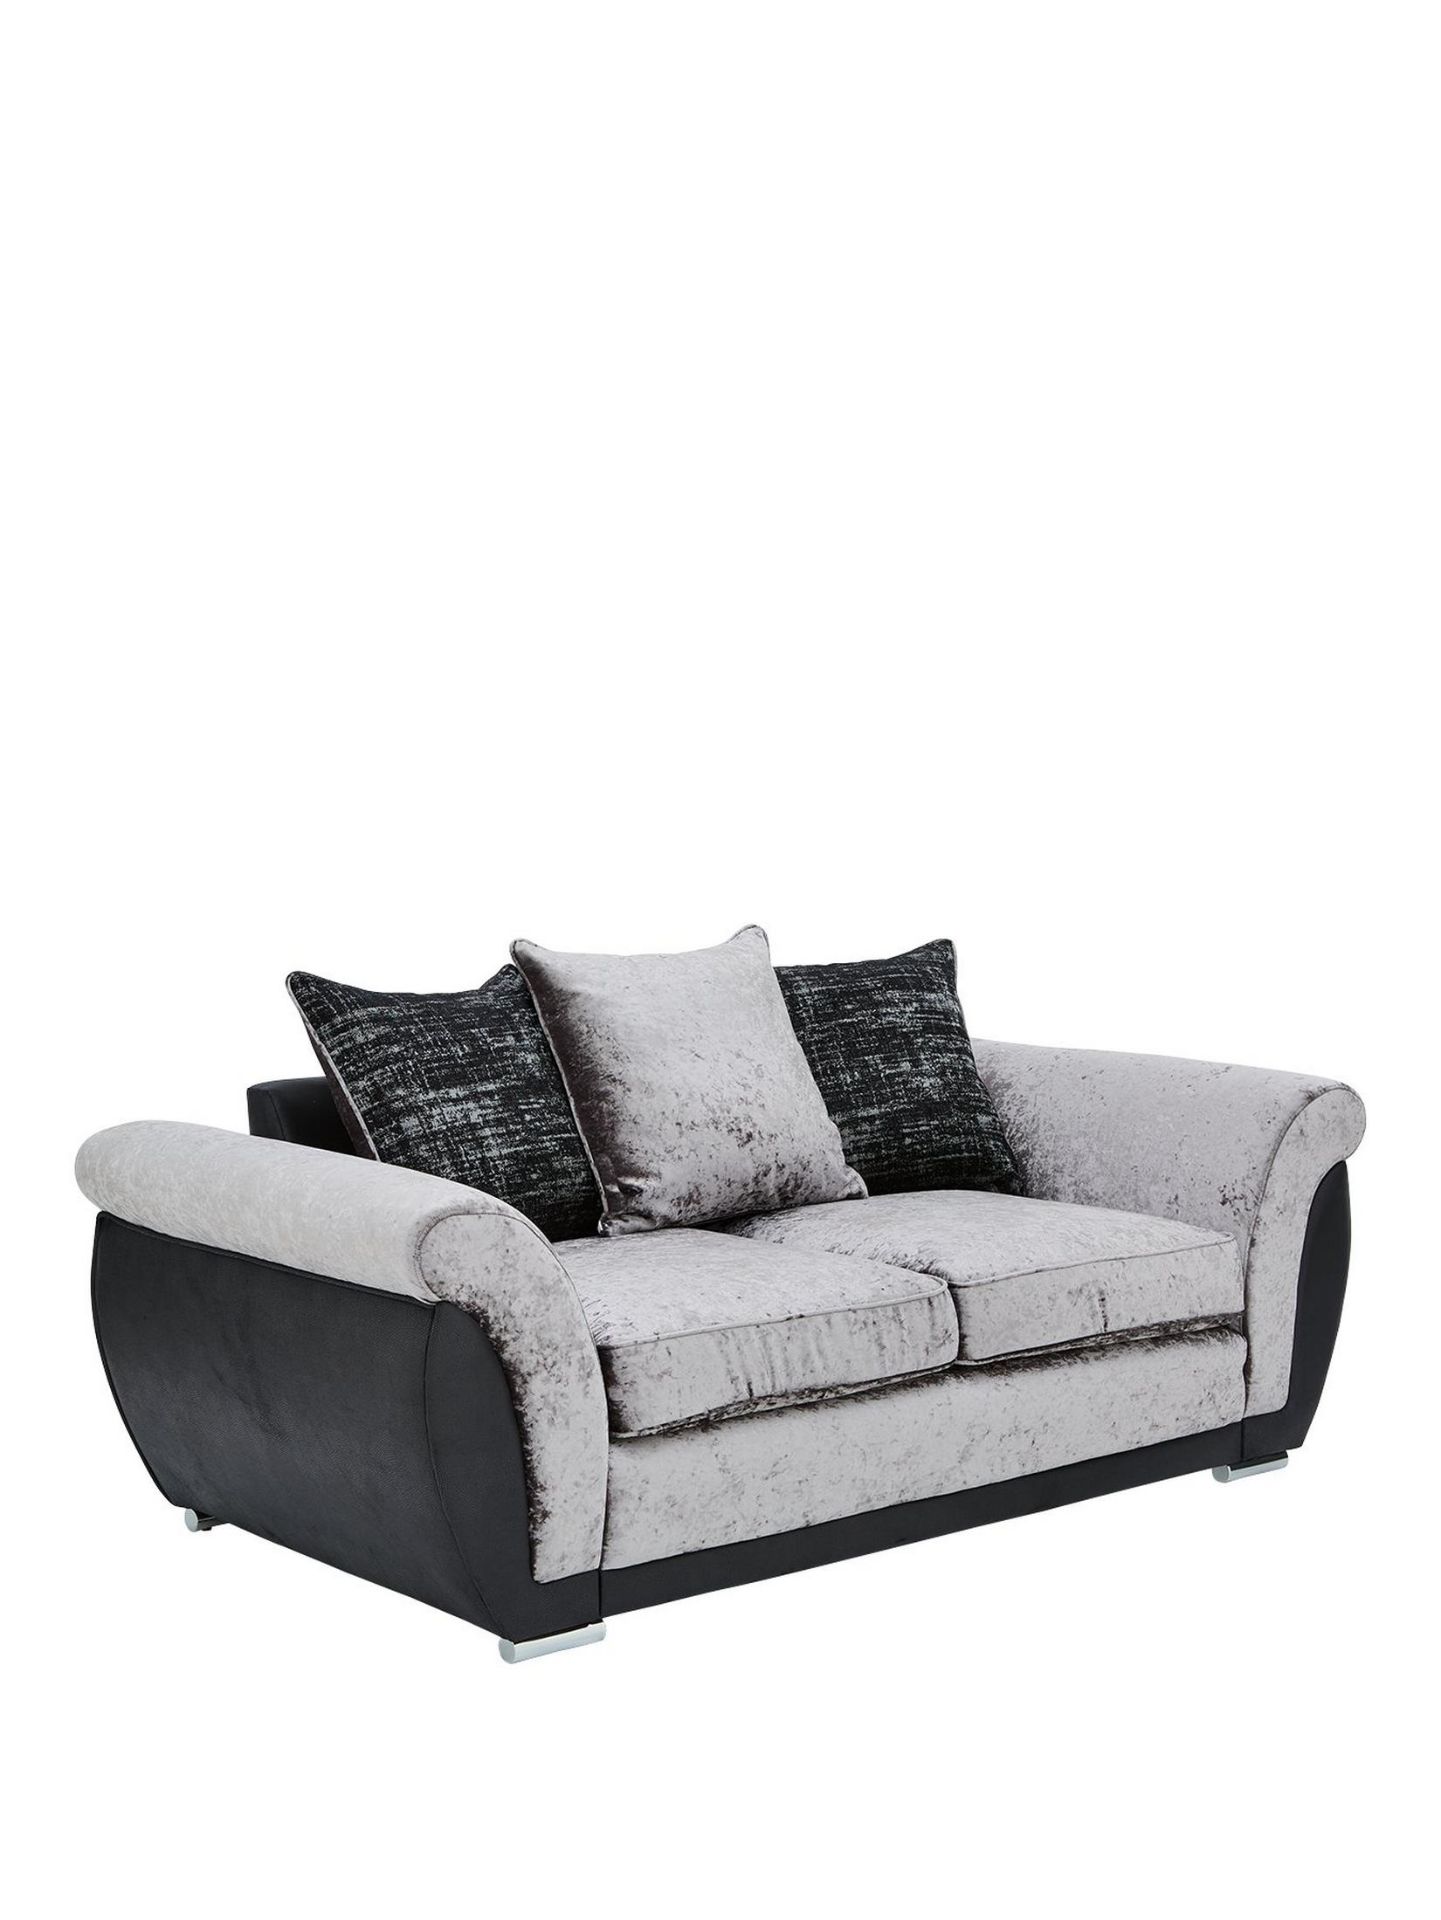 Alexa 2 Seater Sofa. RPP £589.00 . H 93 x W 192 x D 95 cm A trio of textures The supple faux leather - Image 3 of 3